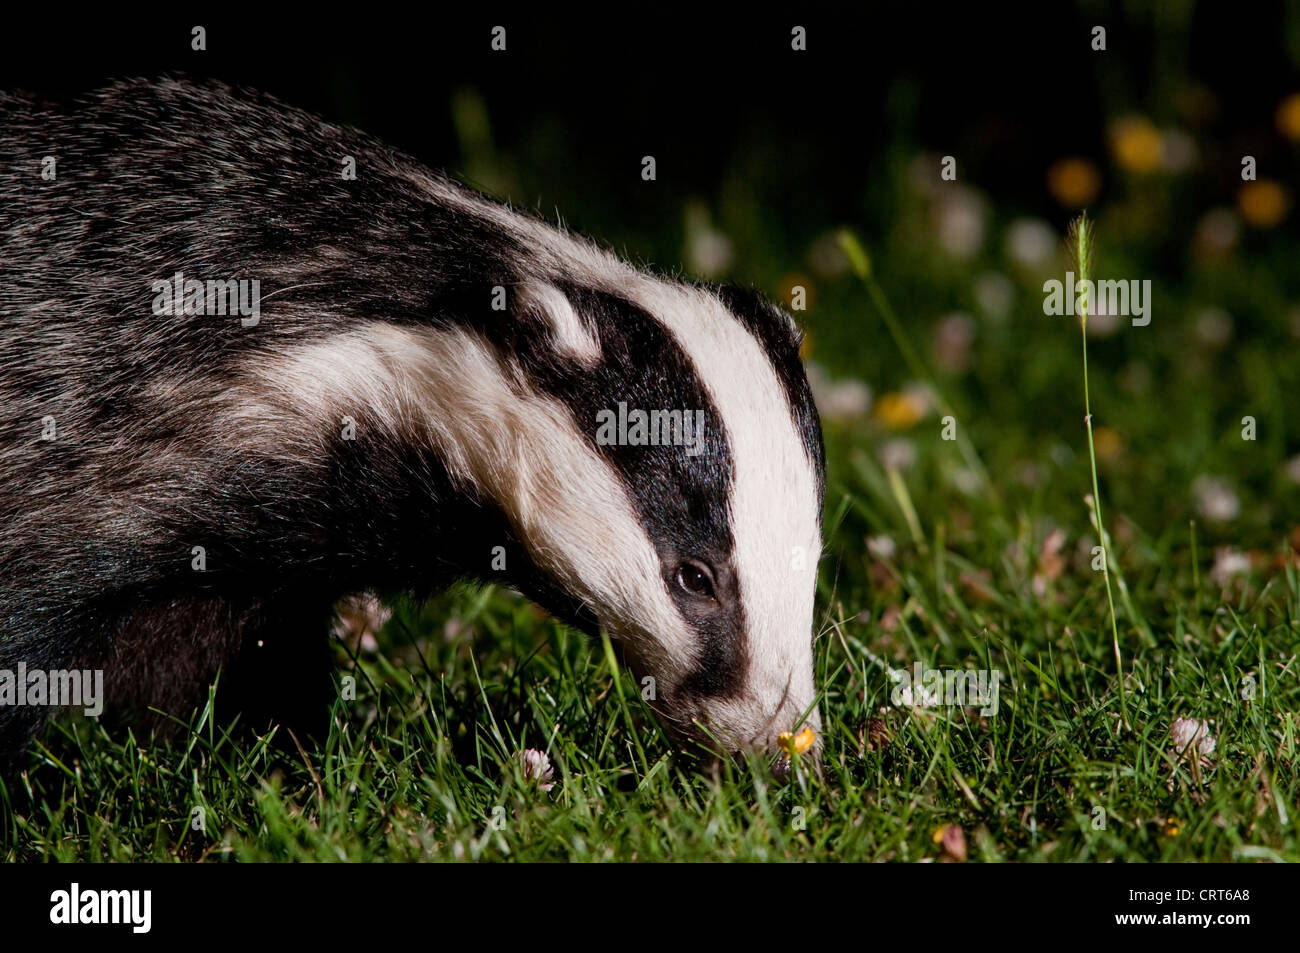 Head and shoulders of an adult eurasian badger (Meles meles) as it hunts for food on grass Stock Photo